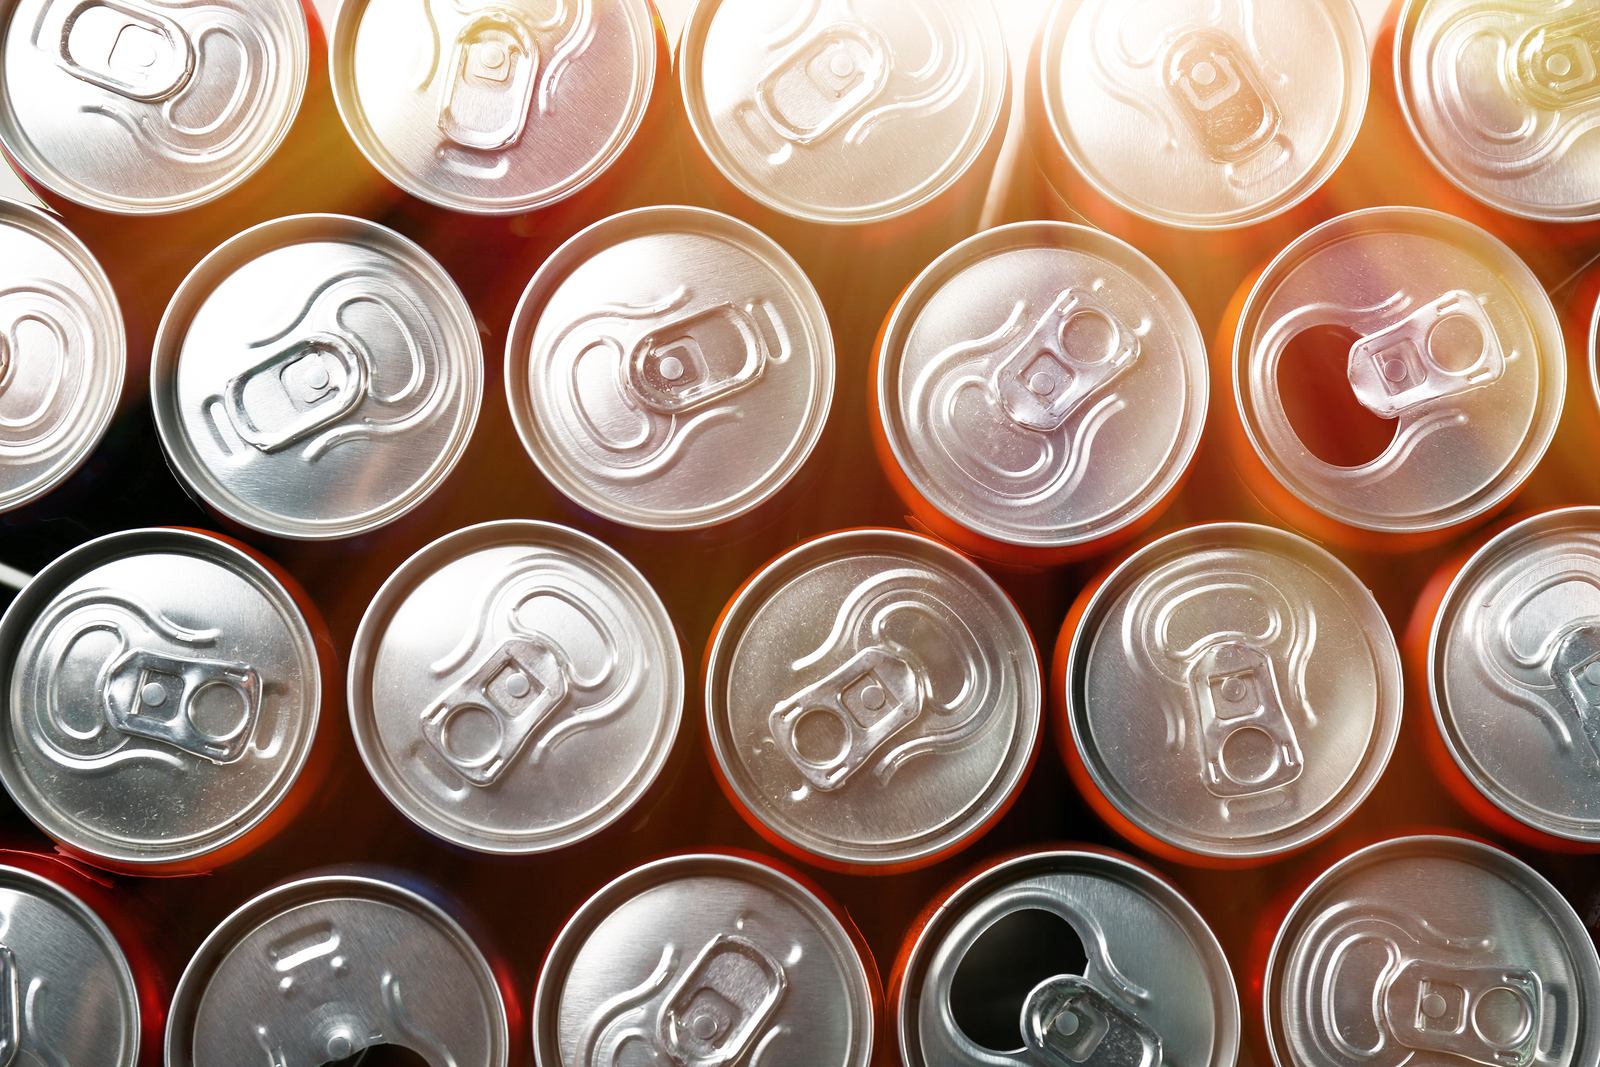 Aluminium can recycling could hit 85% by 2020 - The Forge ...